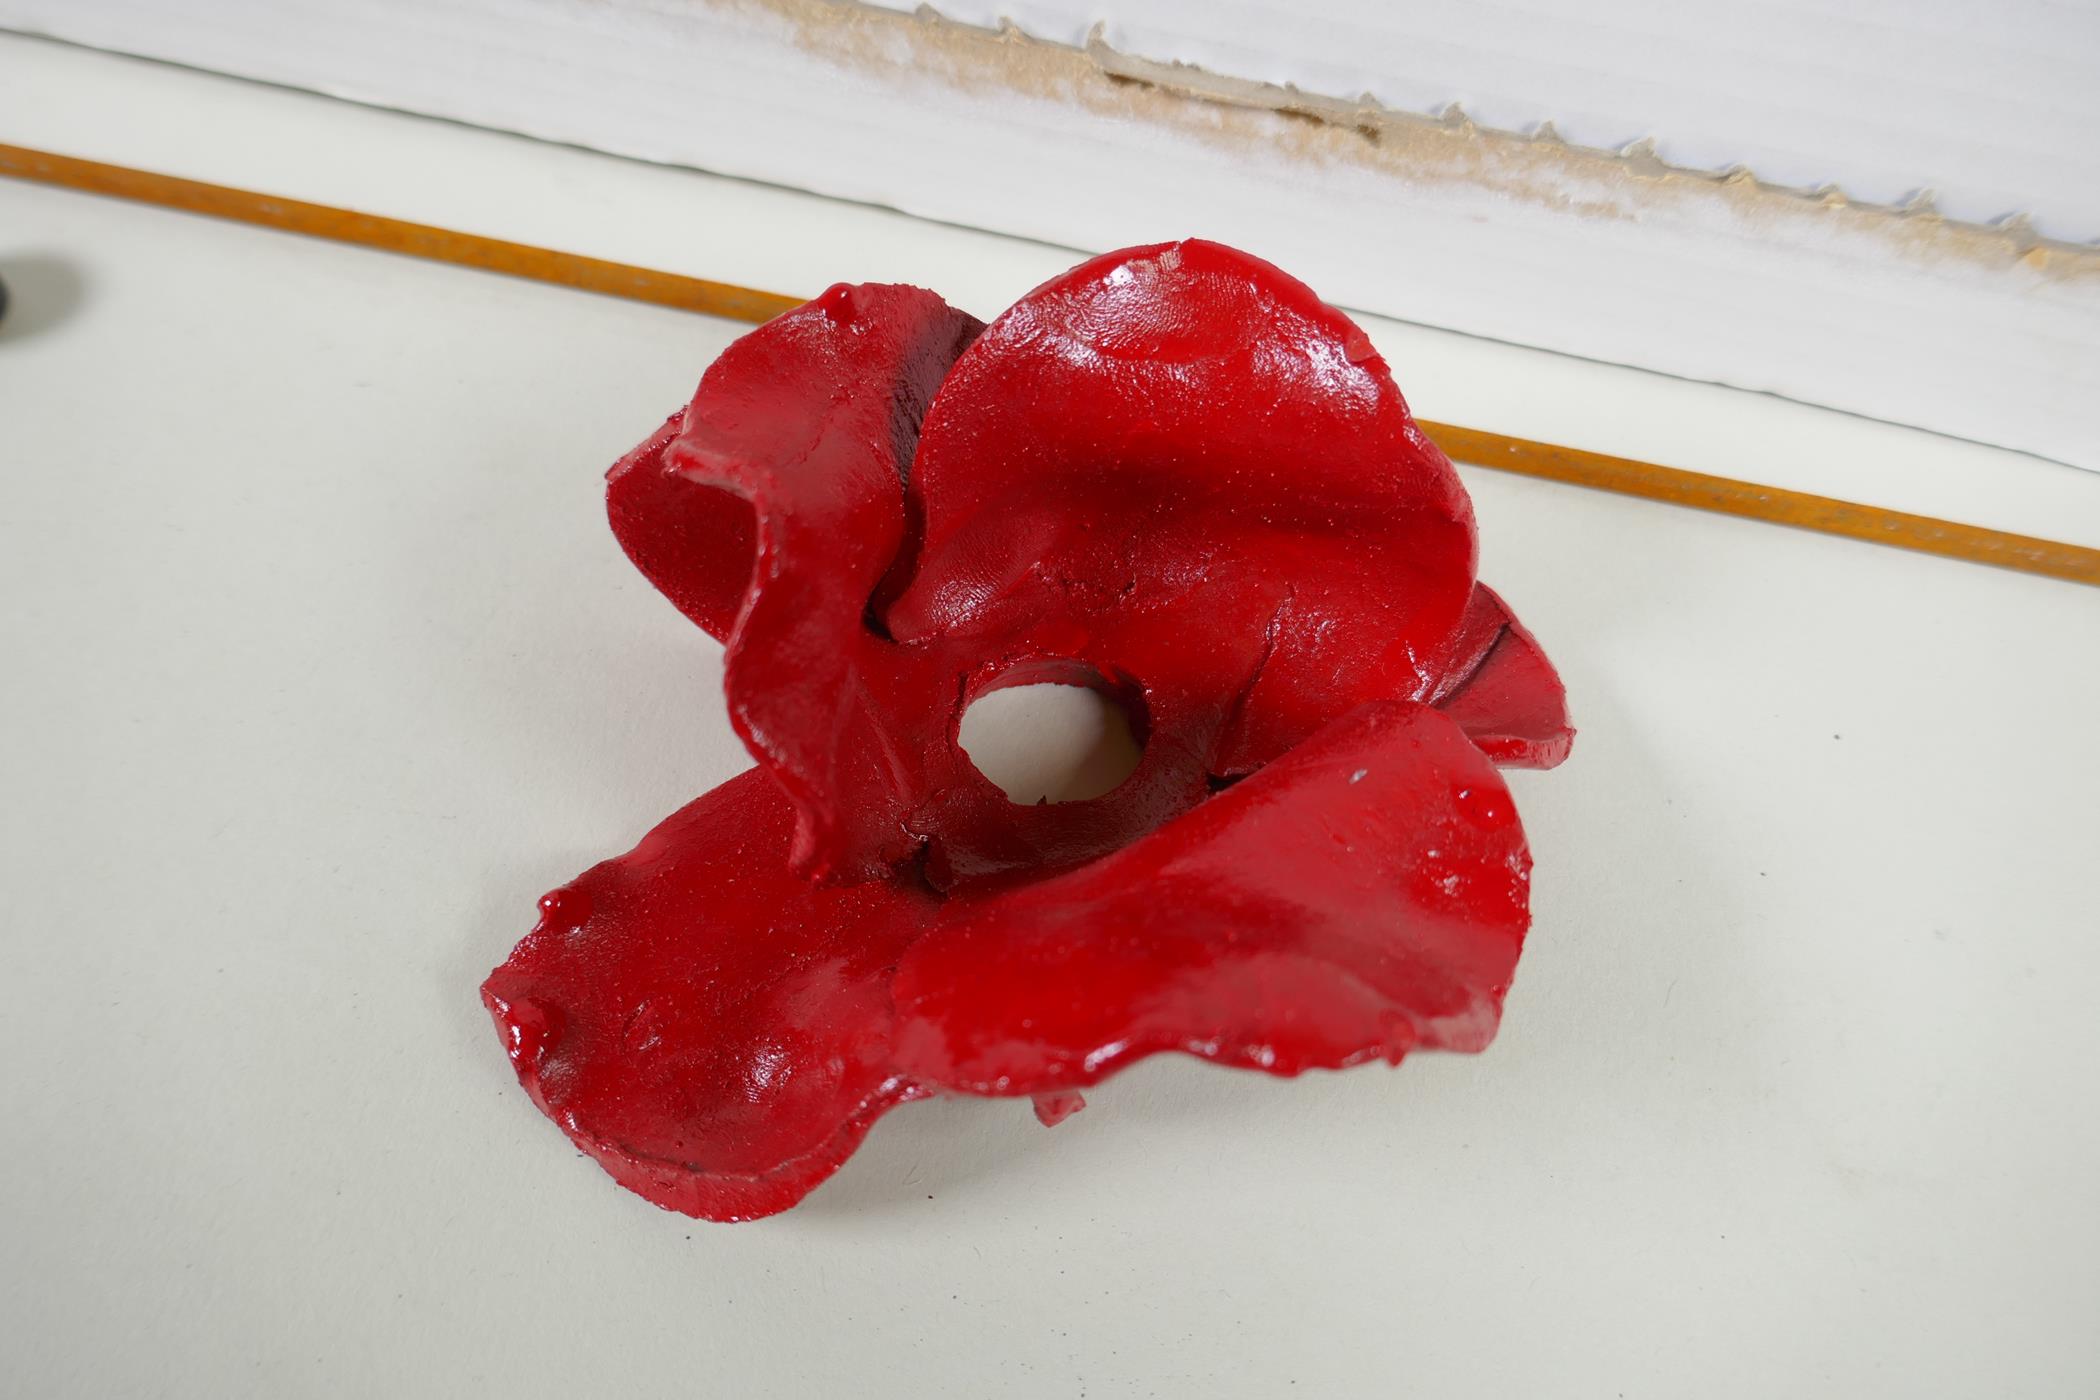 Paul Cummins, (British, b.1977), Blood Swept Lands and Seas of Red, one of 888,246 ceramic poppies - Image 2 of 6